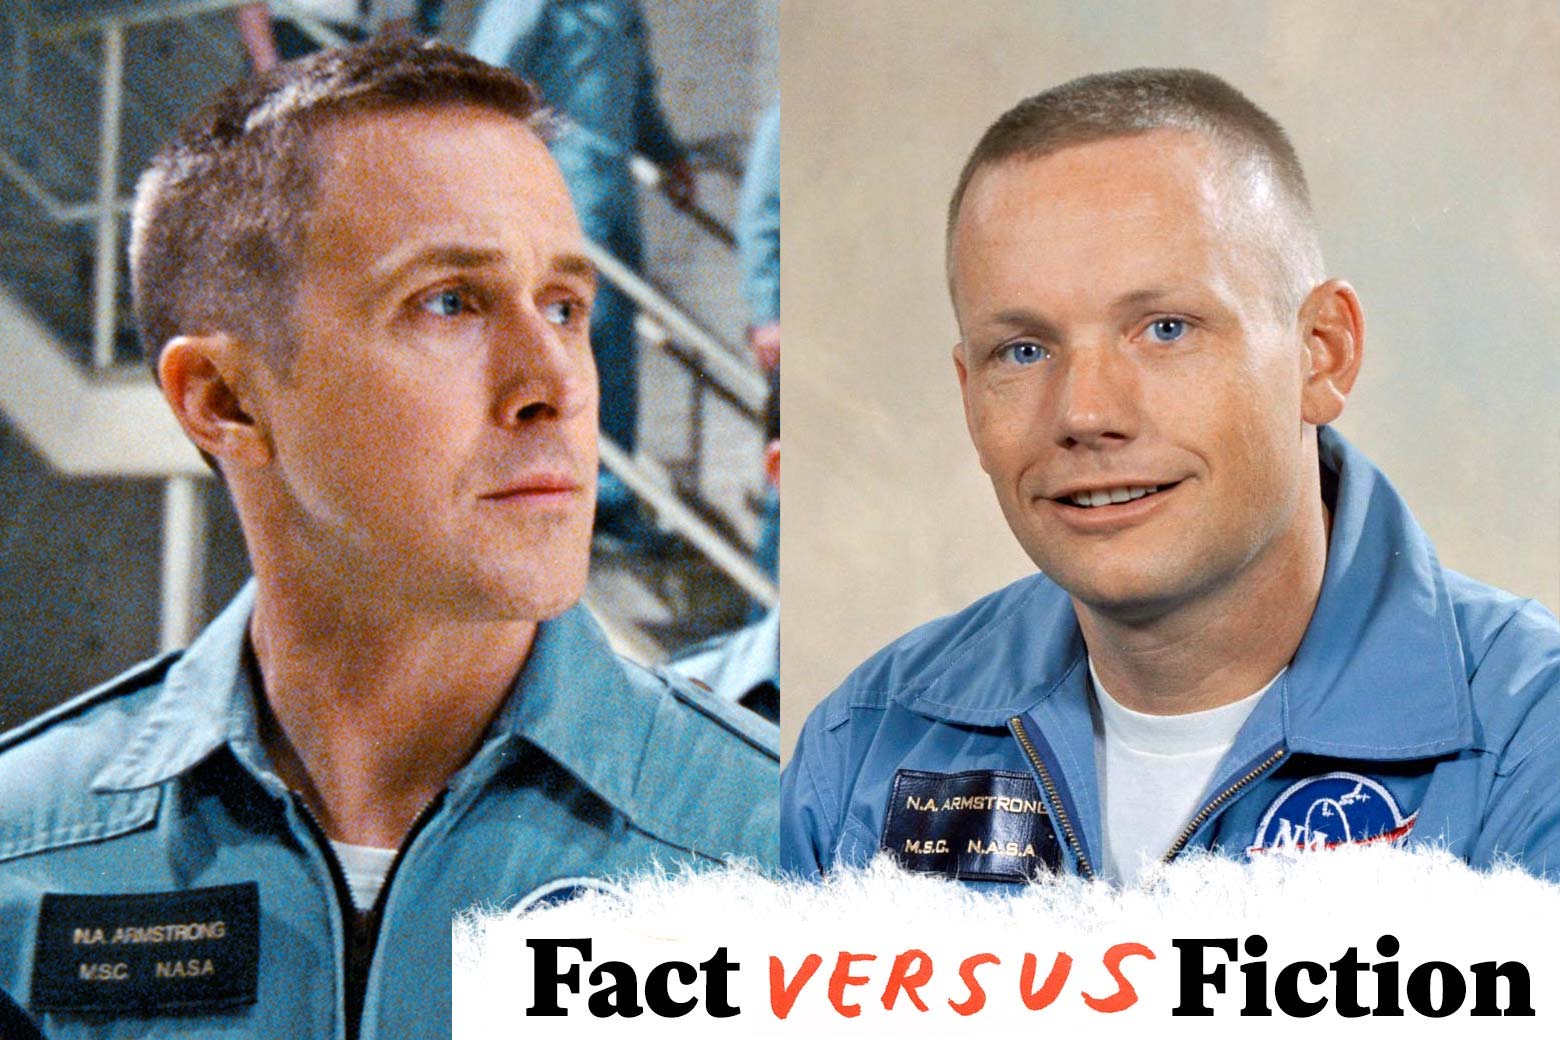 Side by side photo of Ryan Gosling in his portrayal of Neil Armstrong, and a photo of Neil Armstrong in his NASA flight suit.